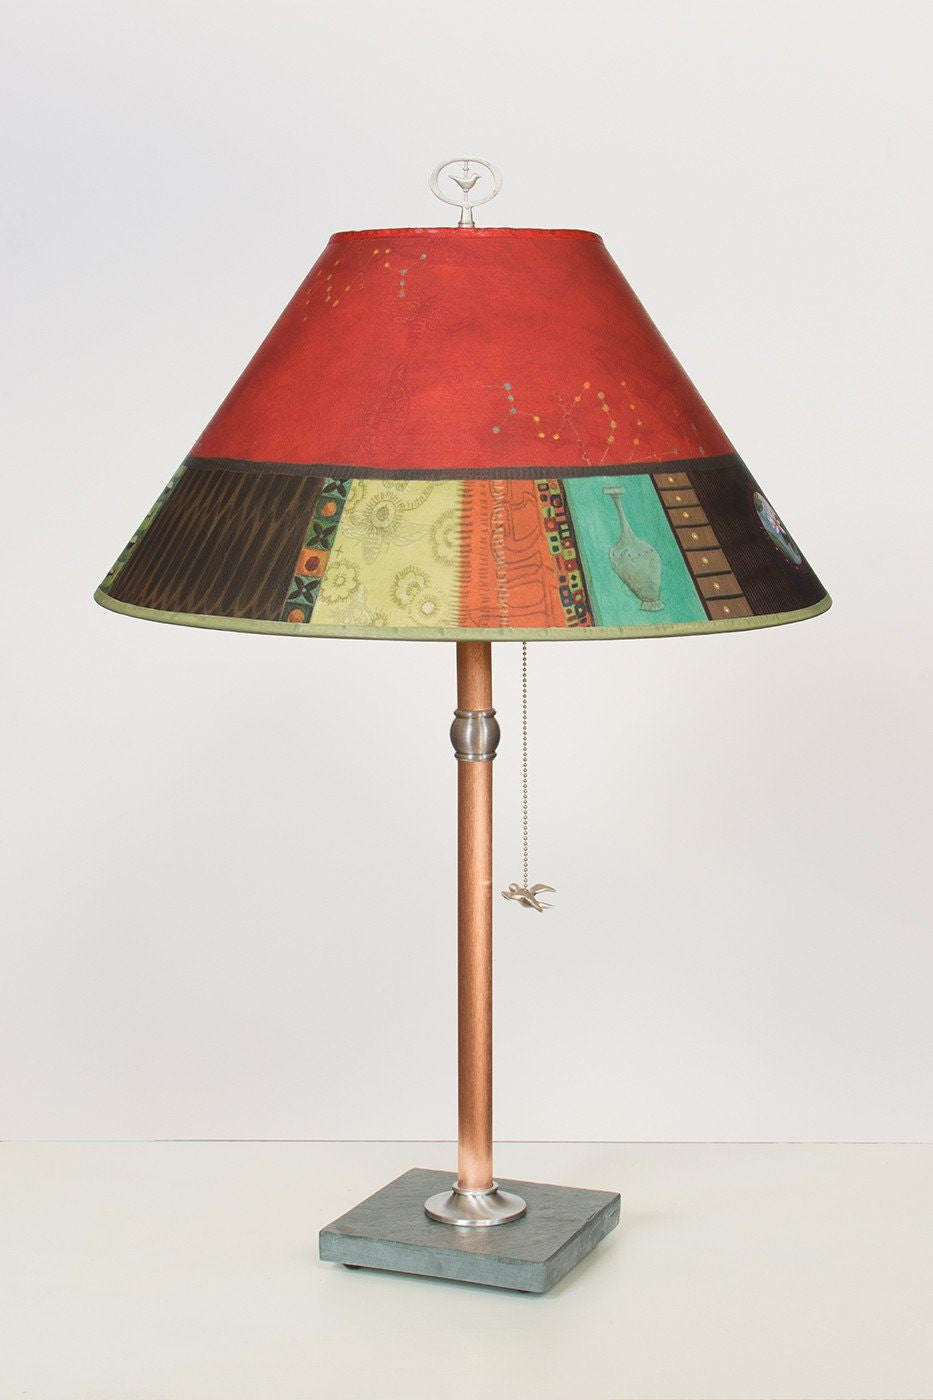 Copper Table Lamp on Vermont Slate with Large Conical Shade in Red Match